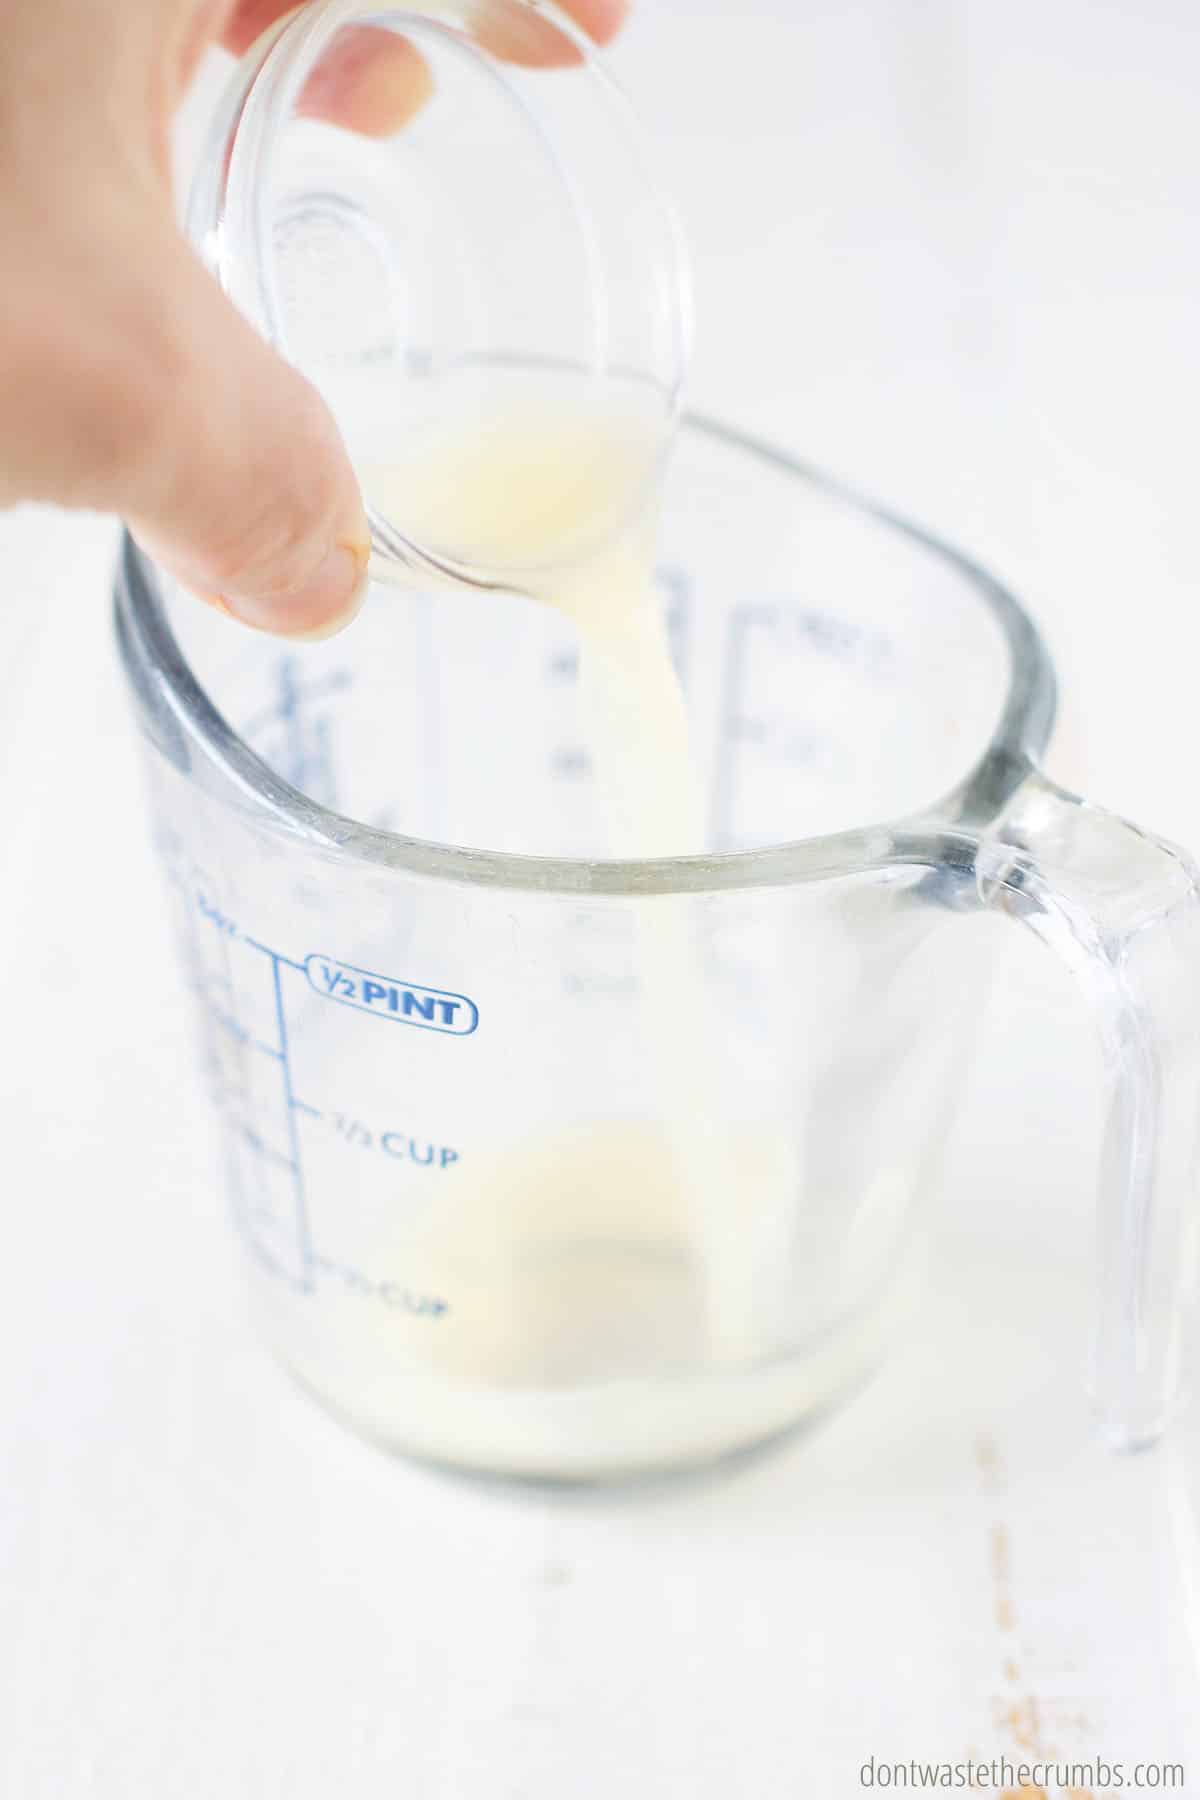 Hand holding a small bowl of lemon juice as it's pouring into a measuring cup